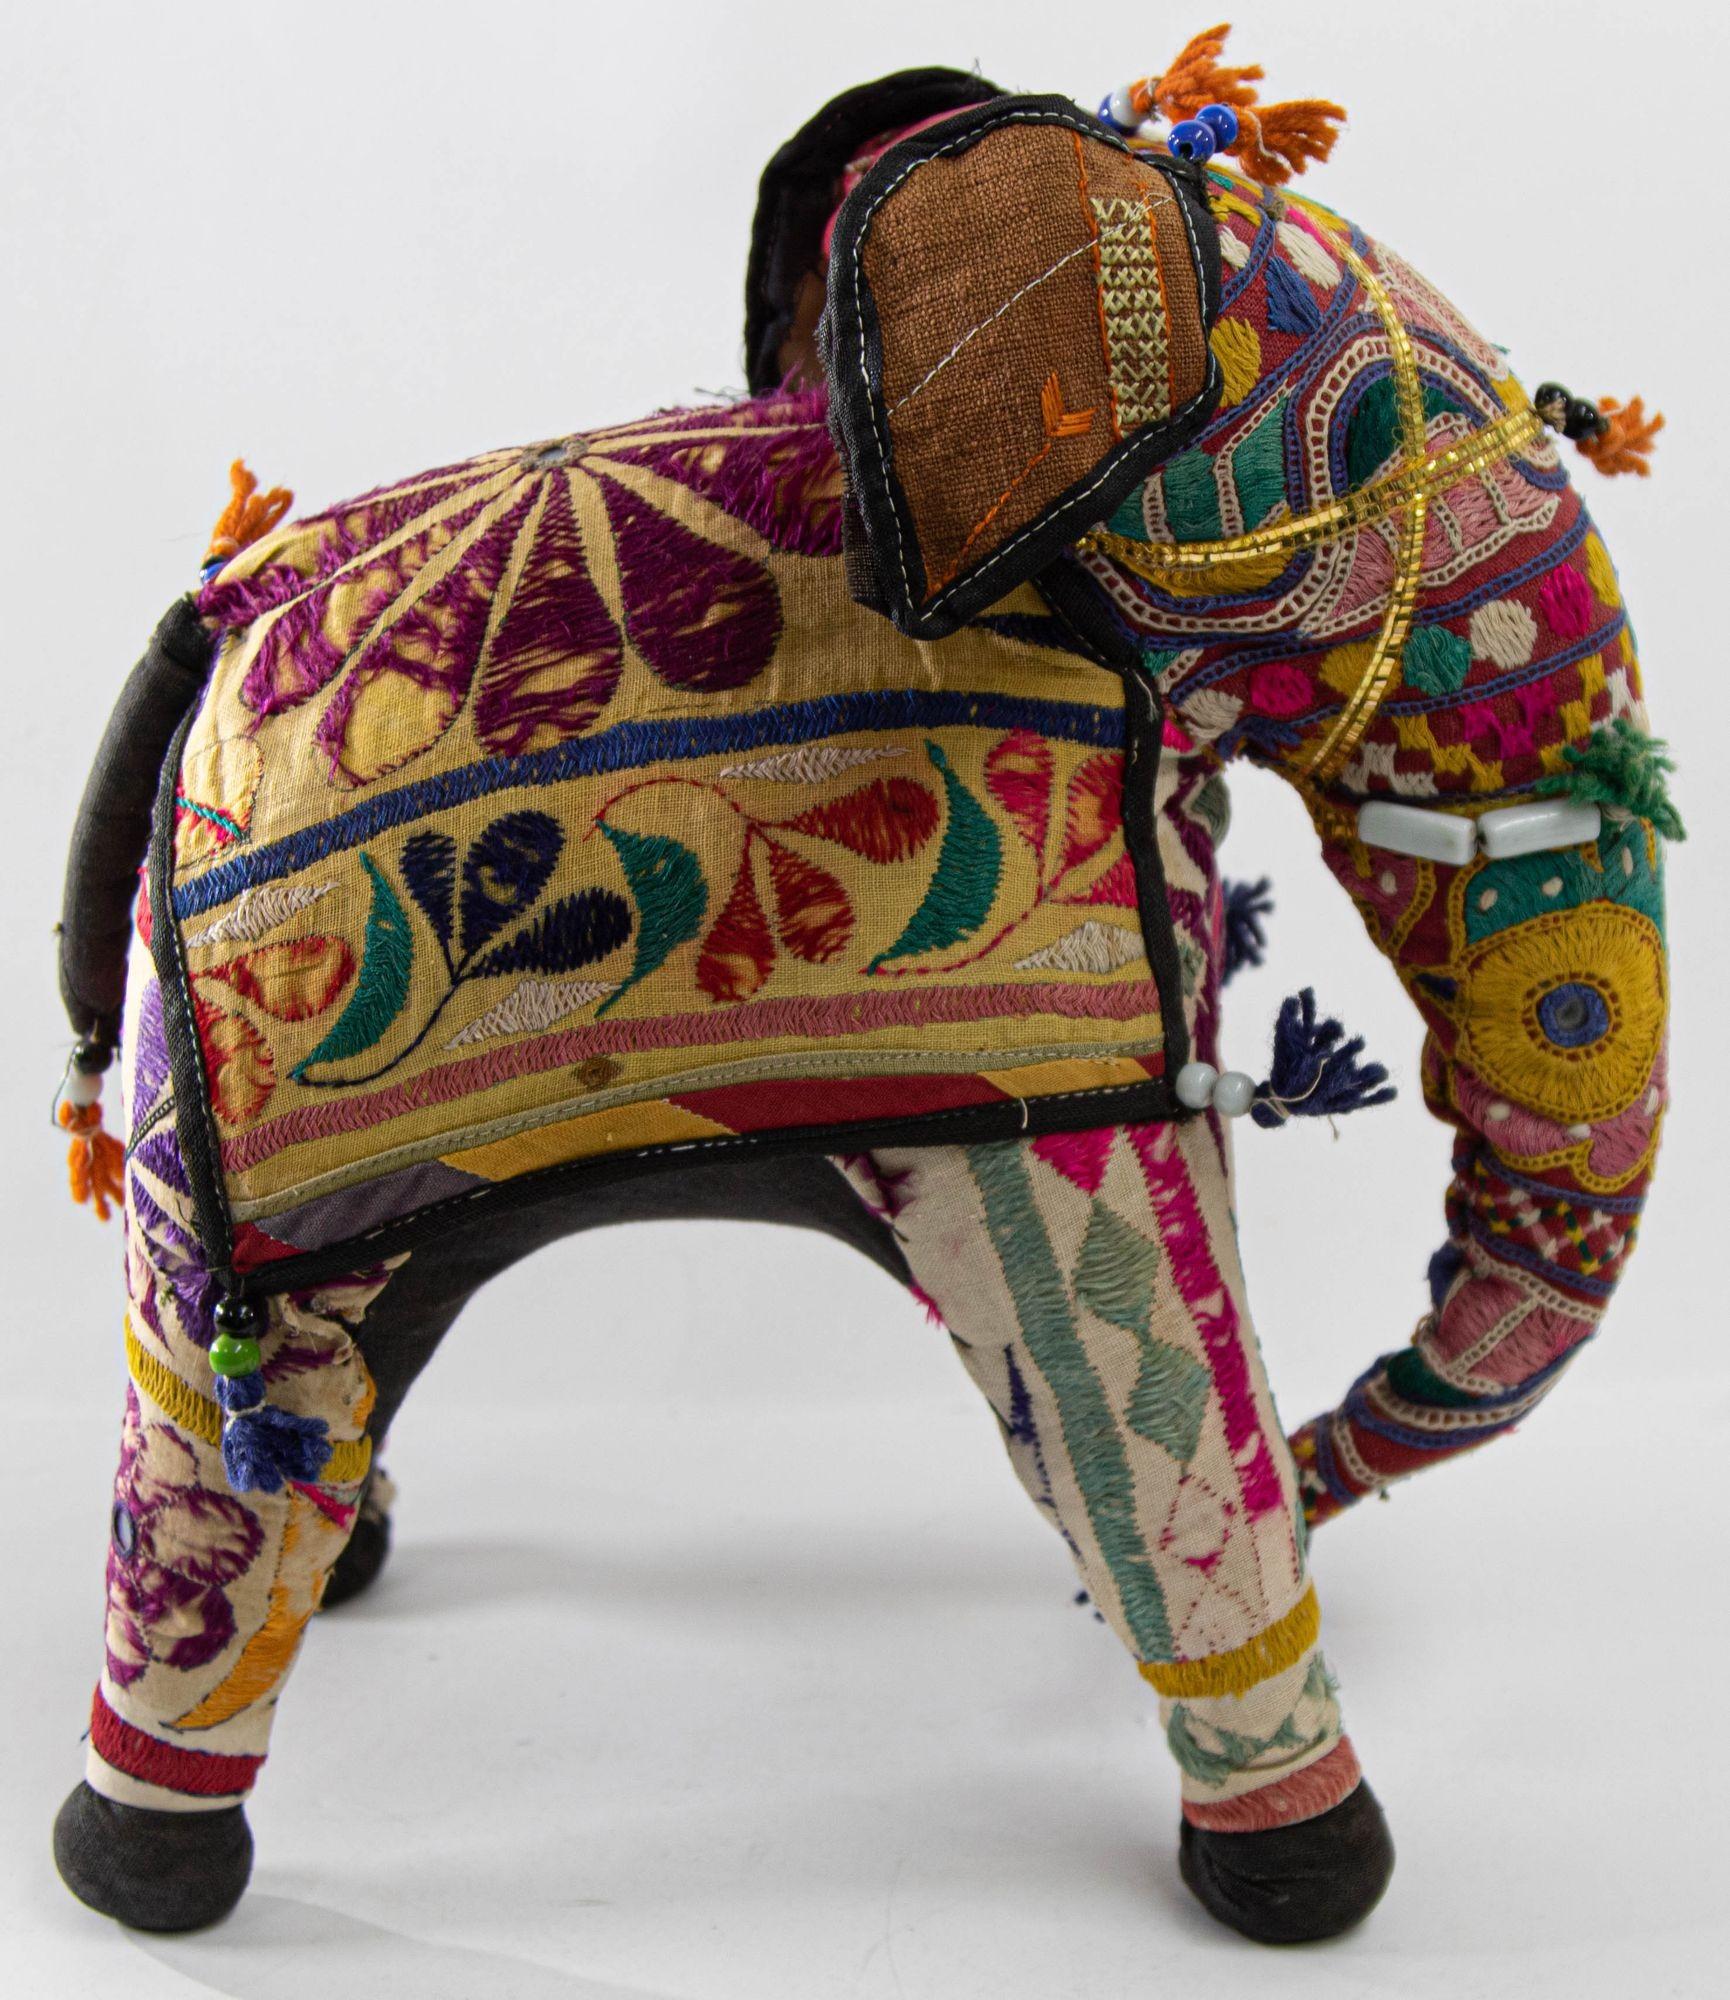 Vintage Handcrafted Stuffed Cotton Embroidered Ceremonial Elephant Toy Raj India For Sale 5